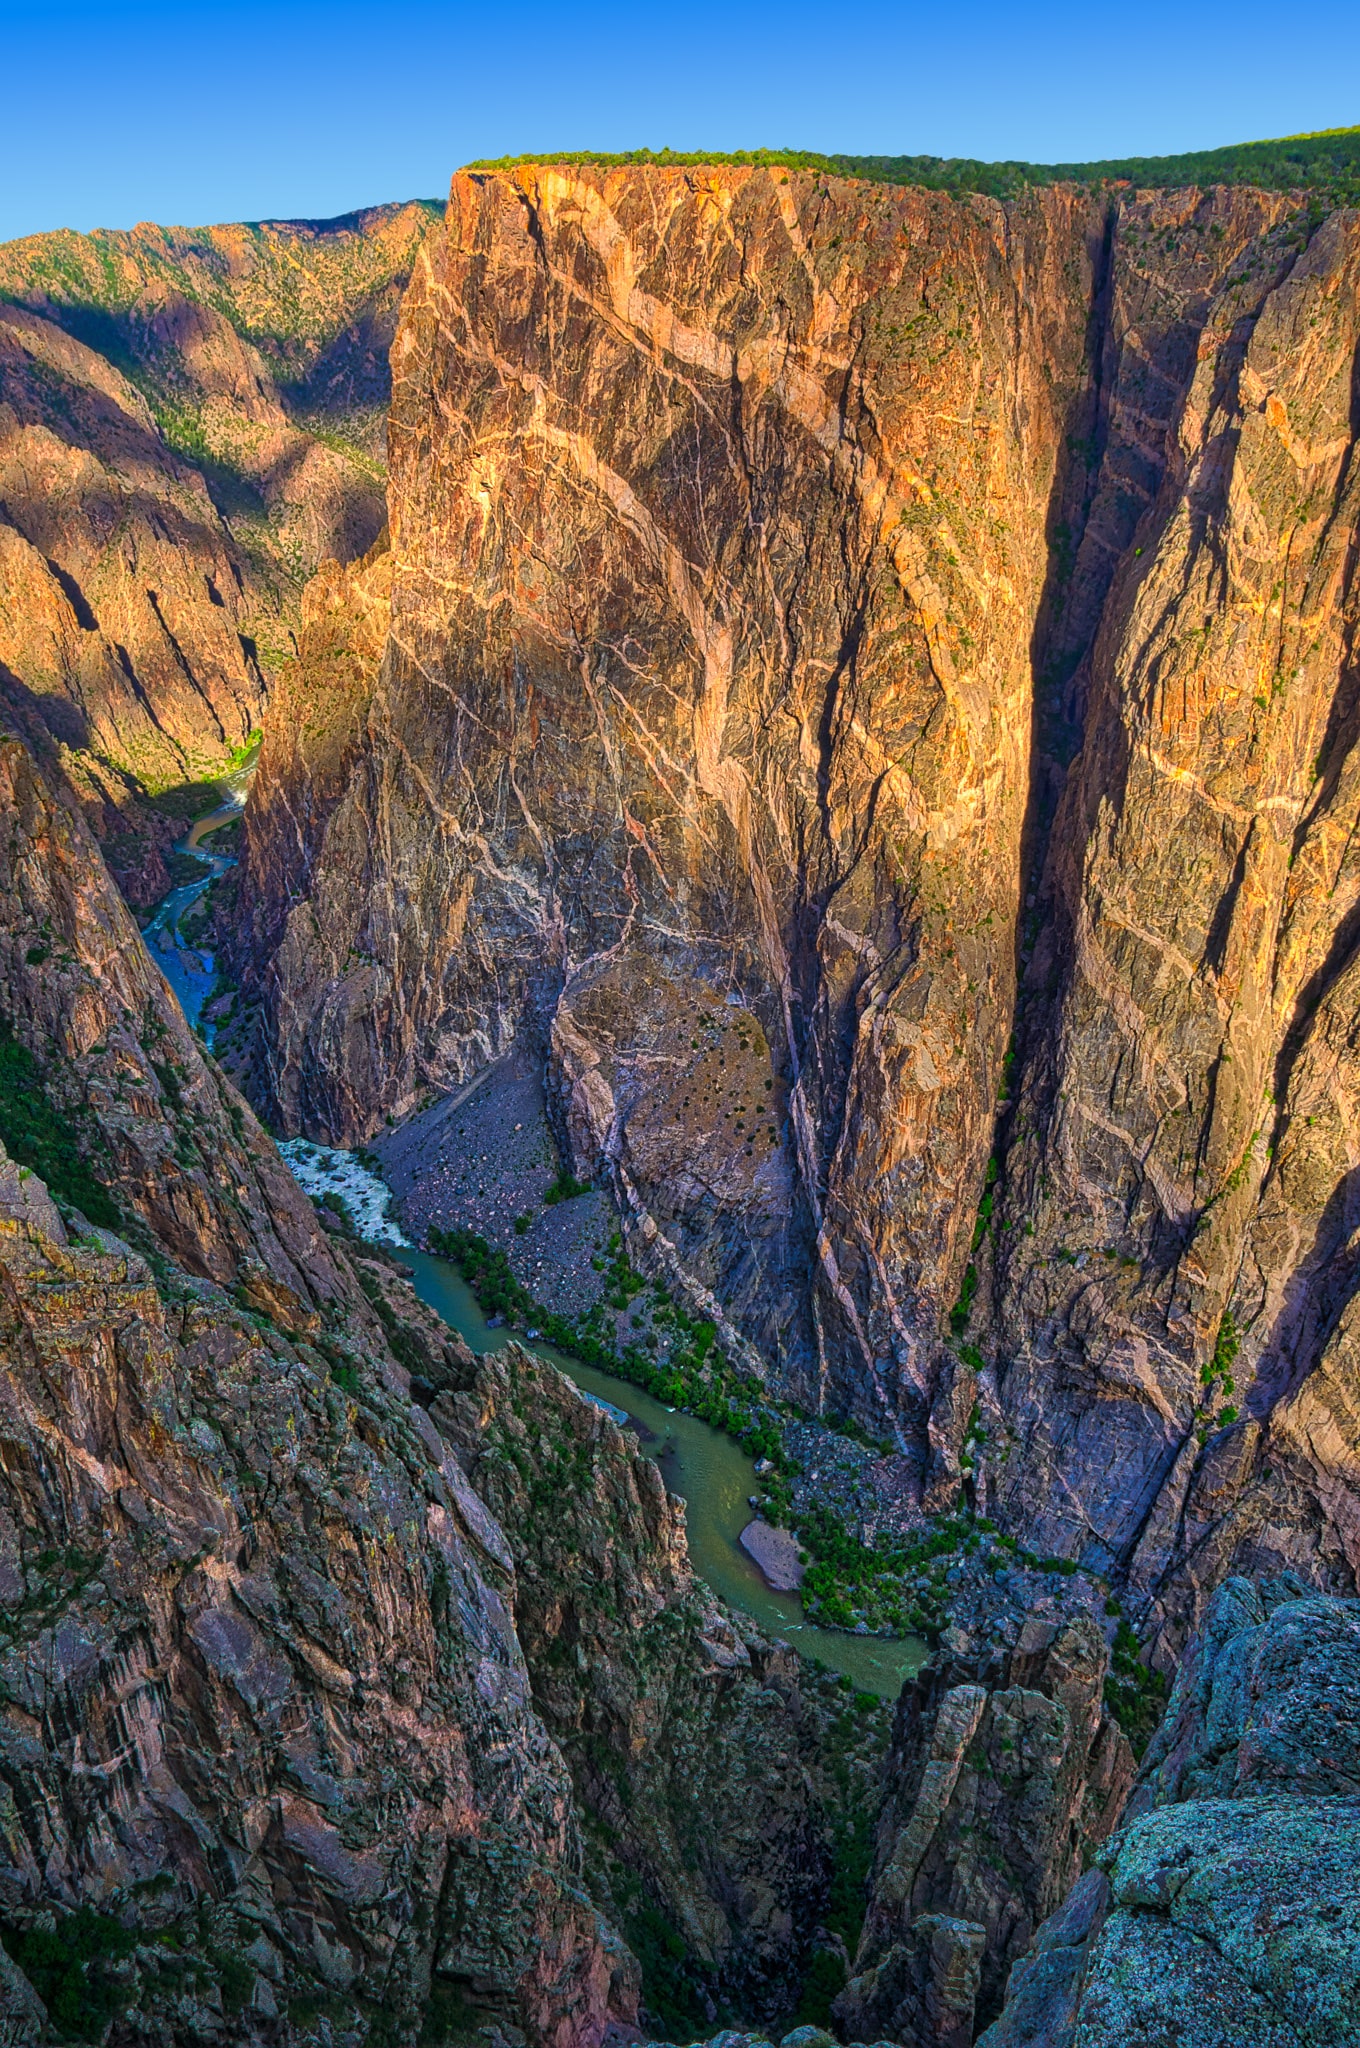 Early morning view of the Painted Wall and the Gunnison River from the south rim of the Black Canyon of the Gunnison National Park near Montrose, Colorado.